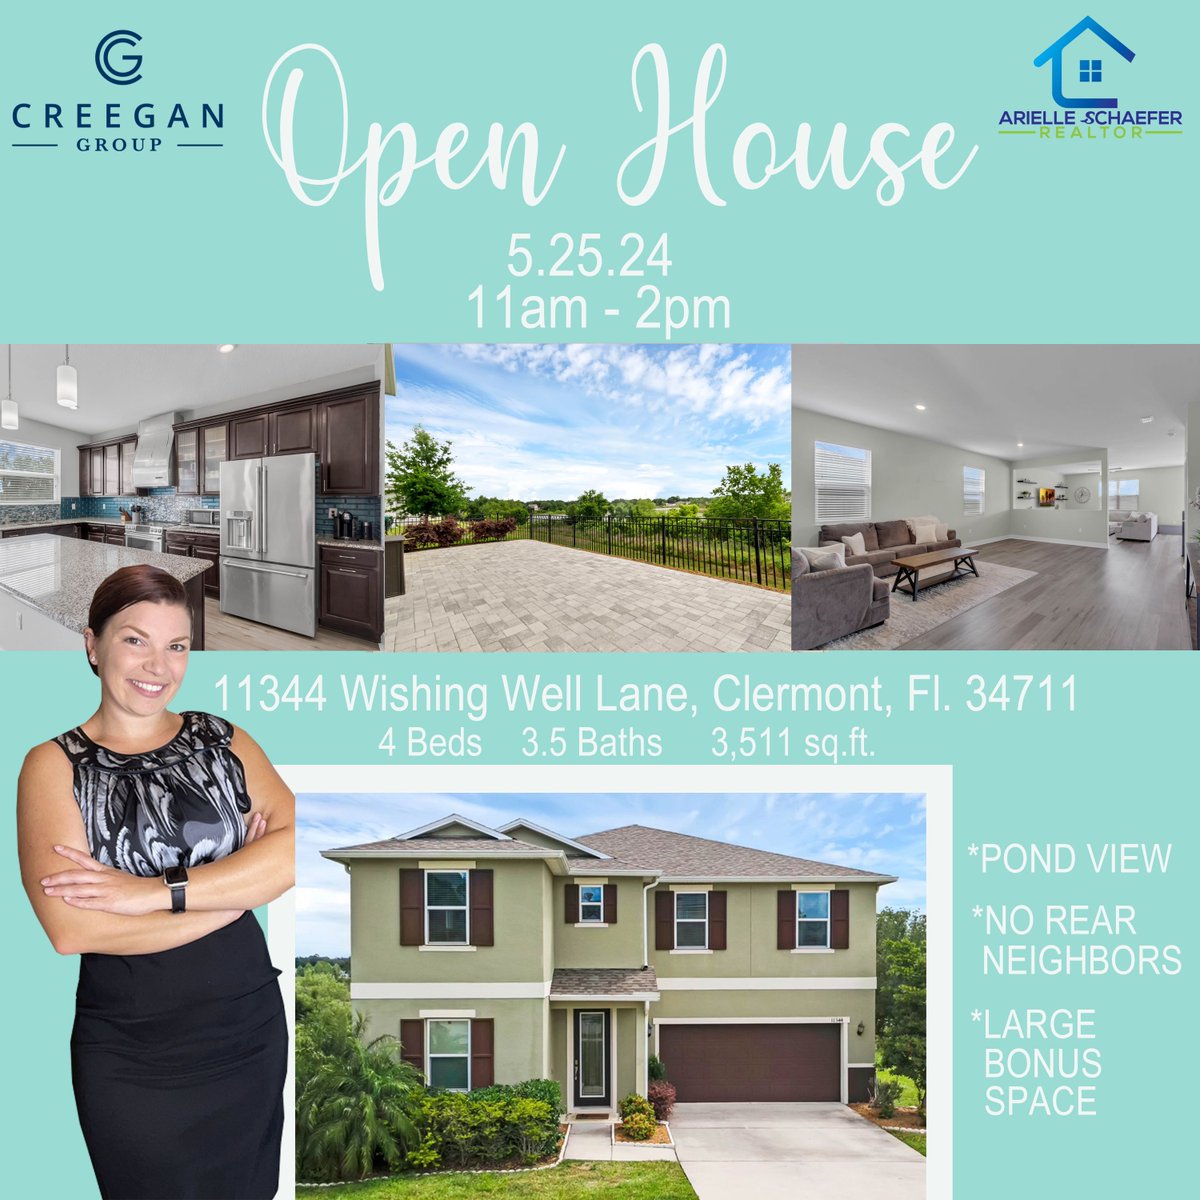 >>>OPEN HOUSE<<< Come one, come all! You are all invited to my open house at this beautiful home with NO rear neighbors/ POND view/ and a LARGE bonus space upstairs! You won't want to miss it!